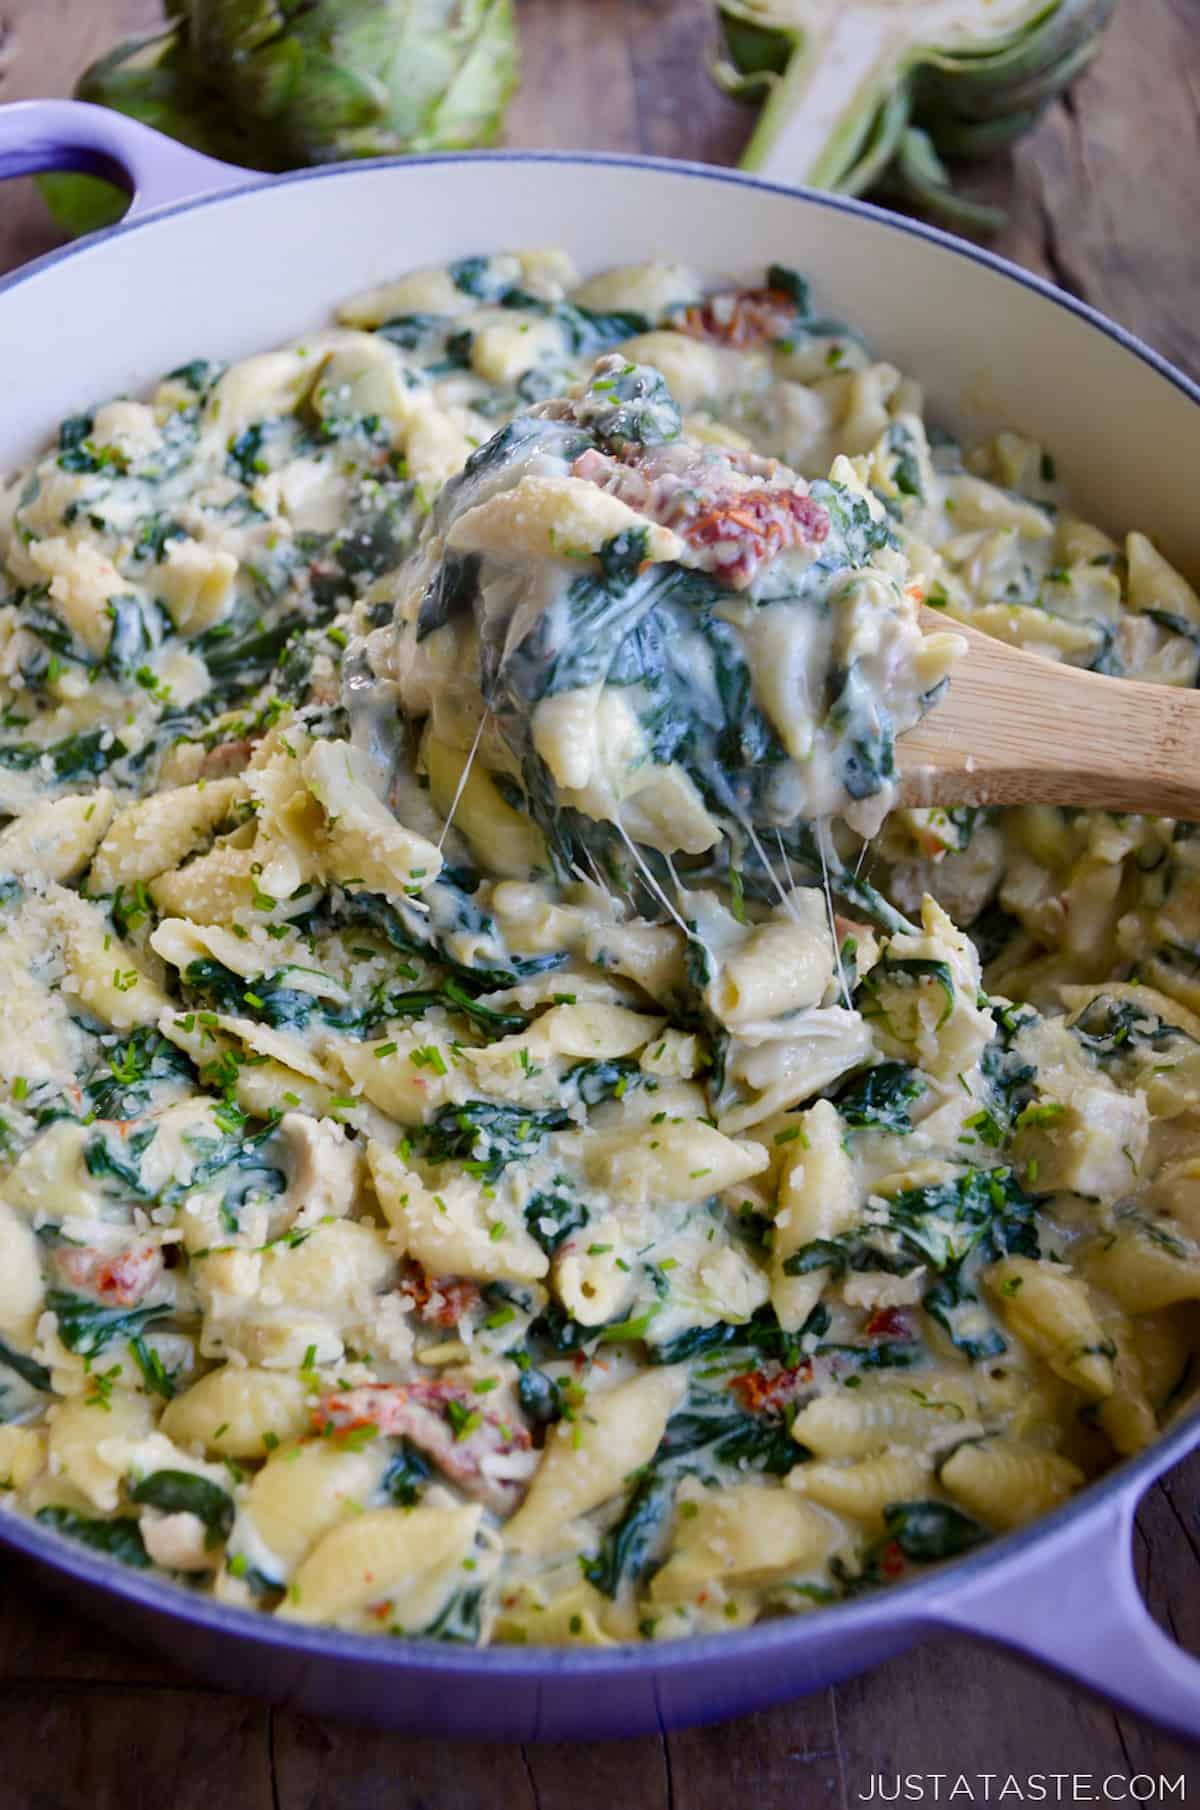 A large wooden spoon digs into a stockpot containing creamy spinach pasta with artichokes, sun-dried tomatoes and chicken.